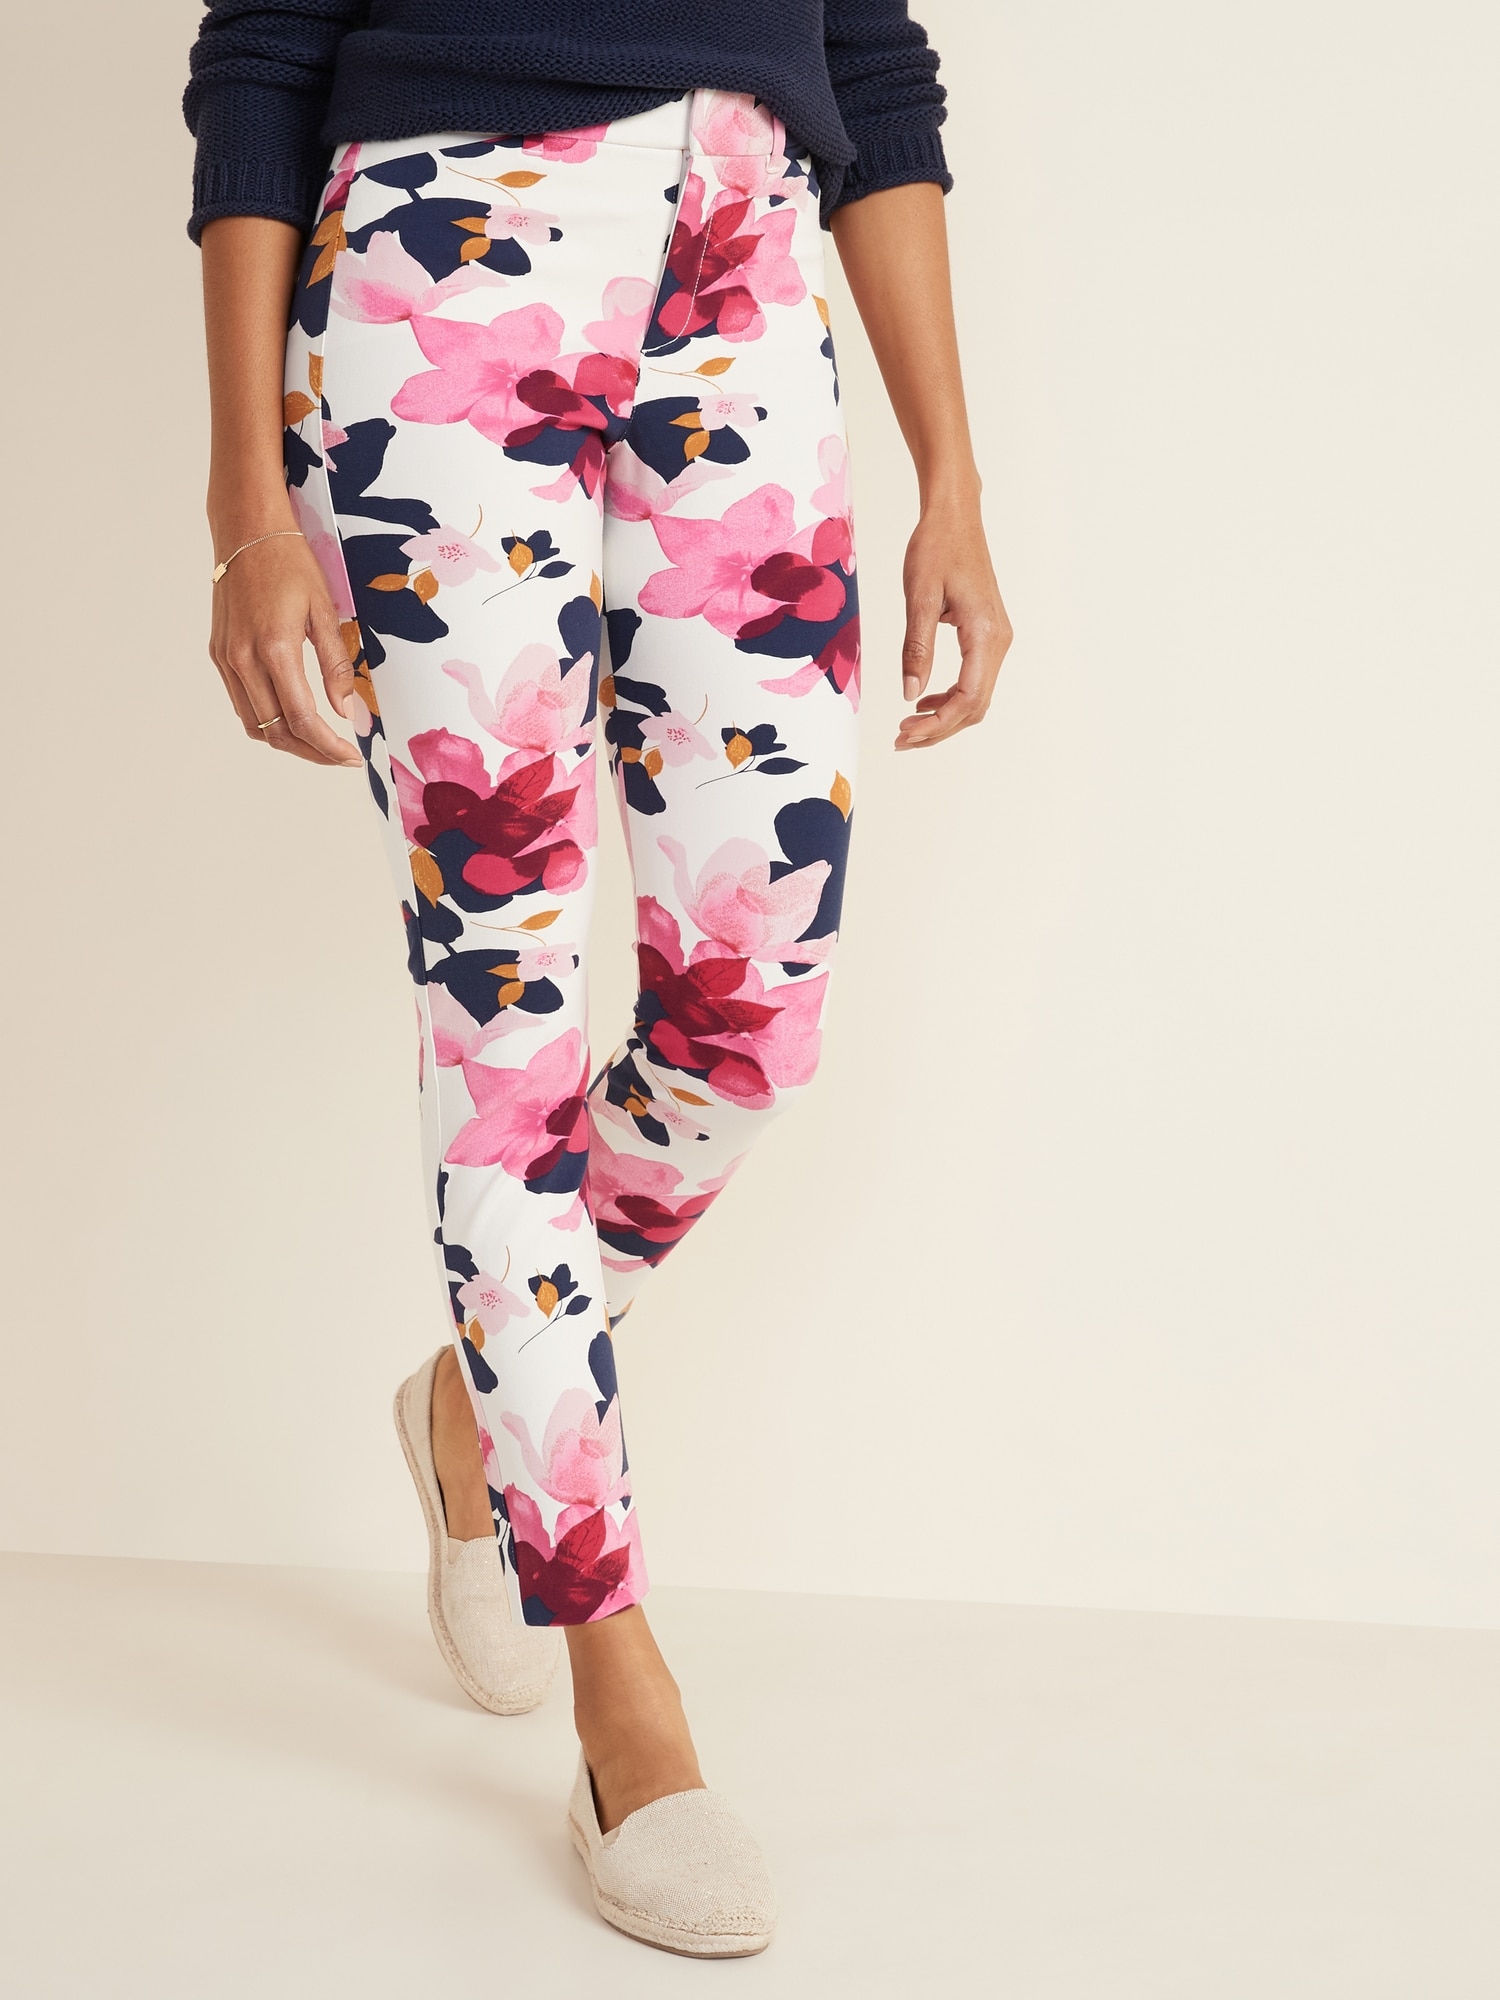 High-Waisted Pixie Ankle Pants for Women